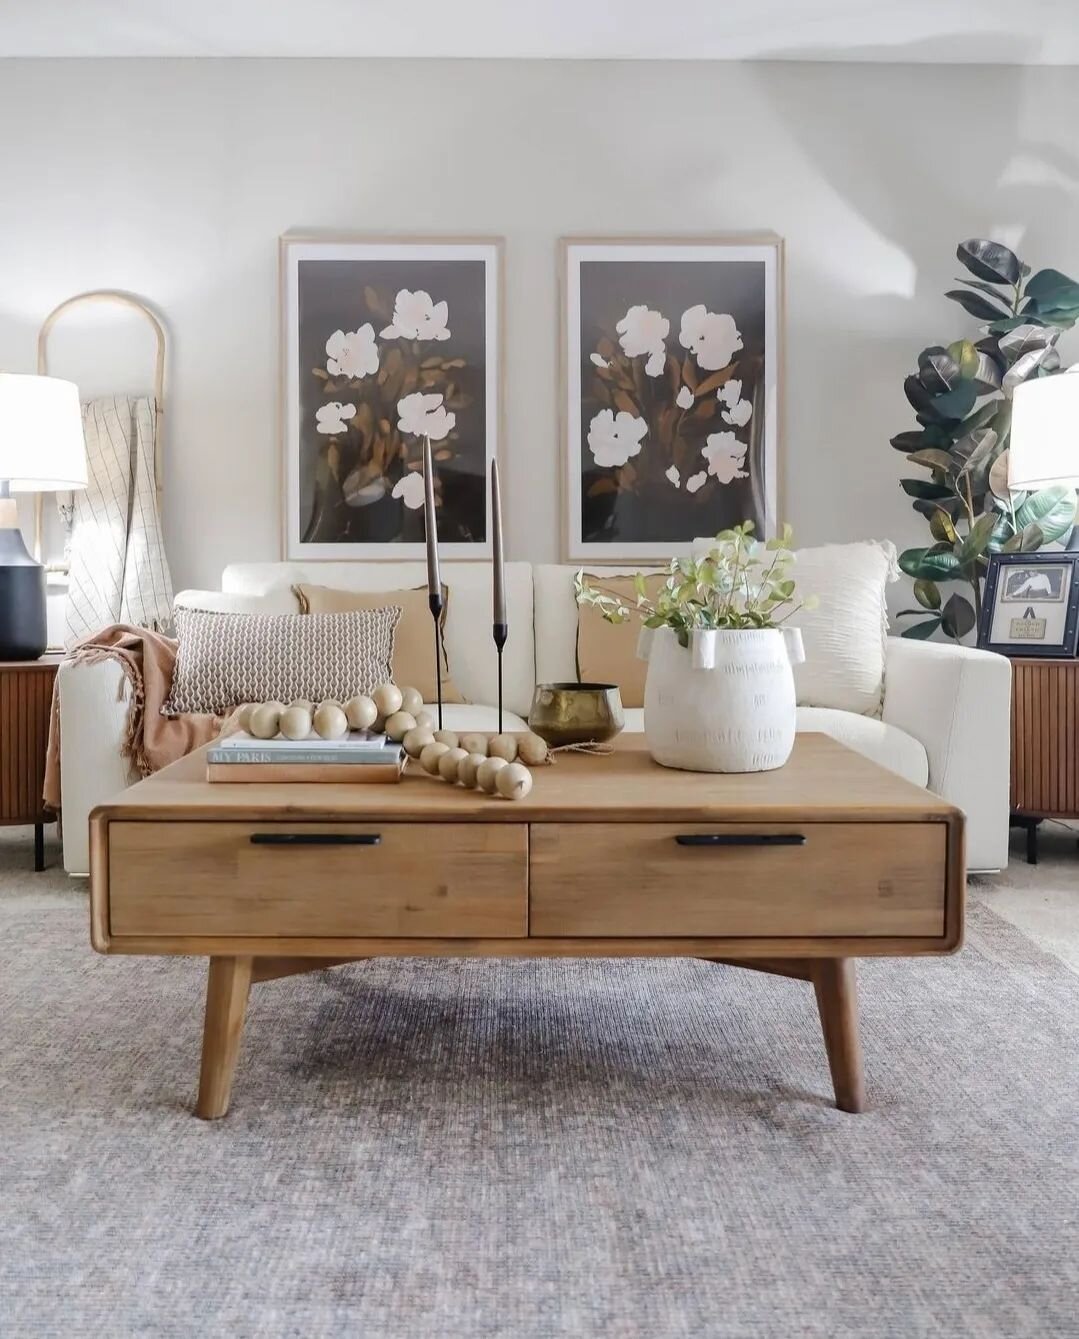 From Tiffany|@prettyrealblog:

&quot;I made over my mom's living room with&nbsp;@castleryus&nbsp;and we could not love it more! We focused on a comfortable, deep sofa - the Hamilton Sofa, and the Seb Coffee Table and Harper Side Tables which both hav